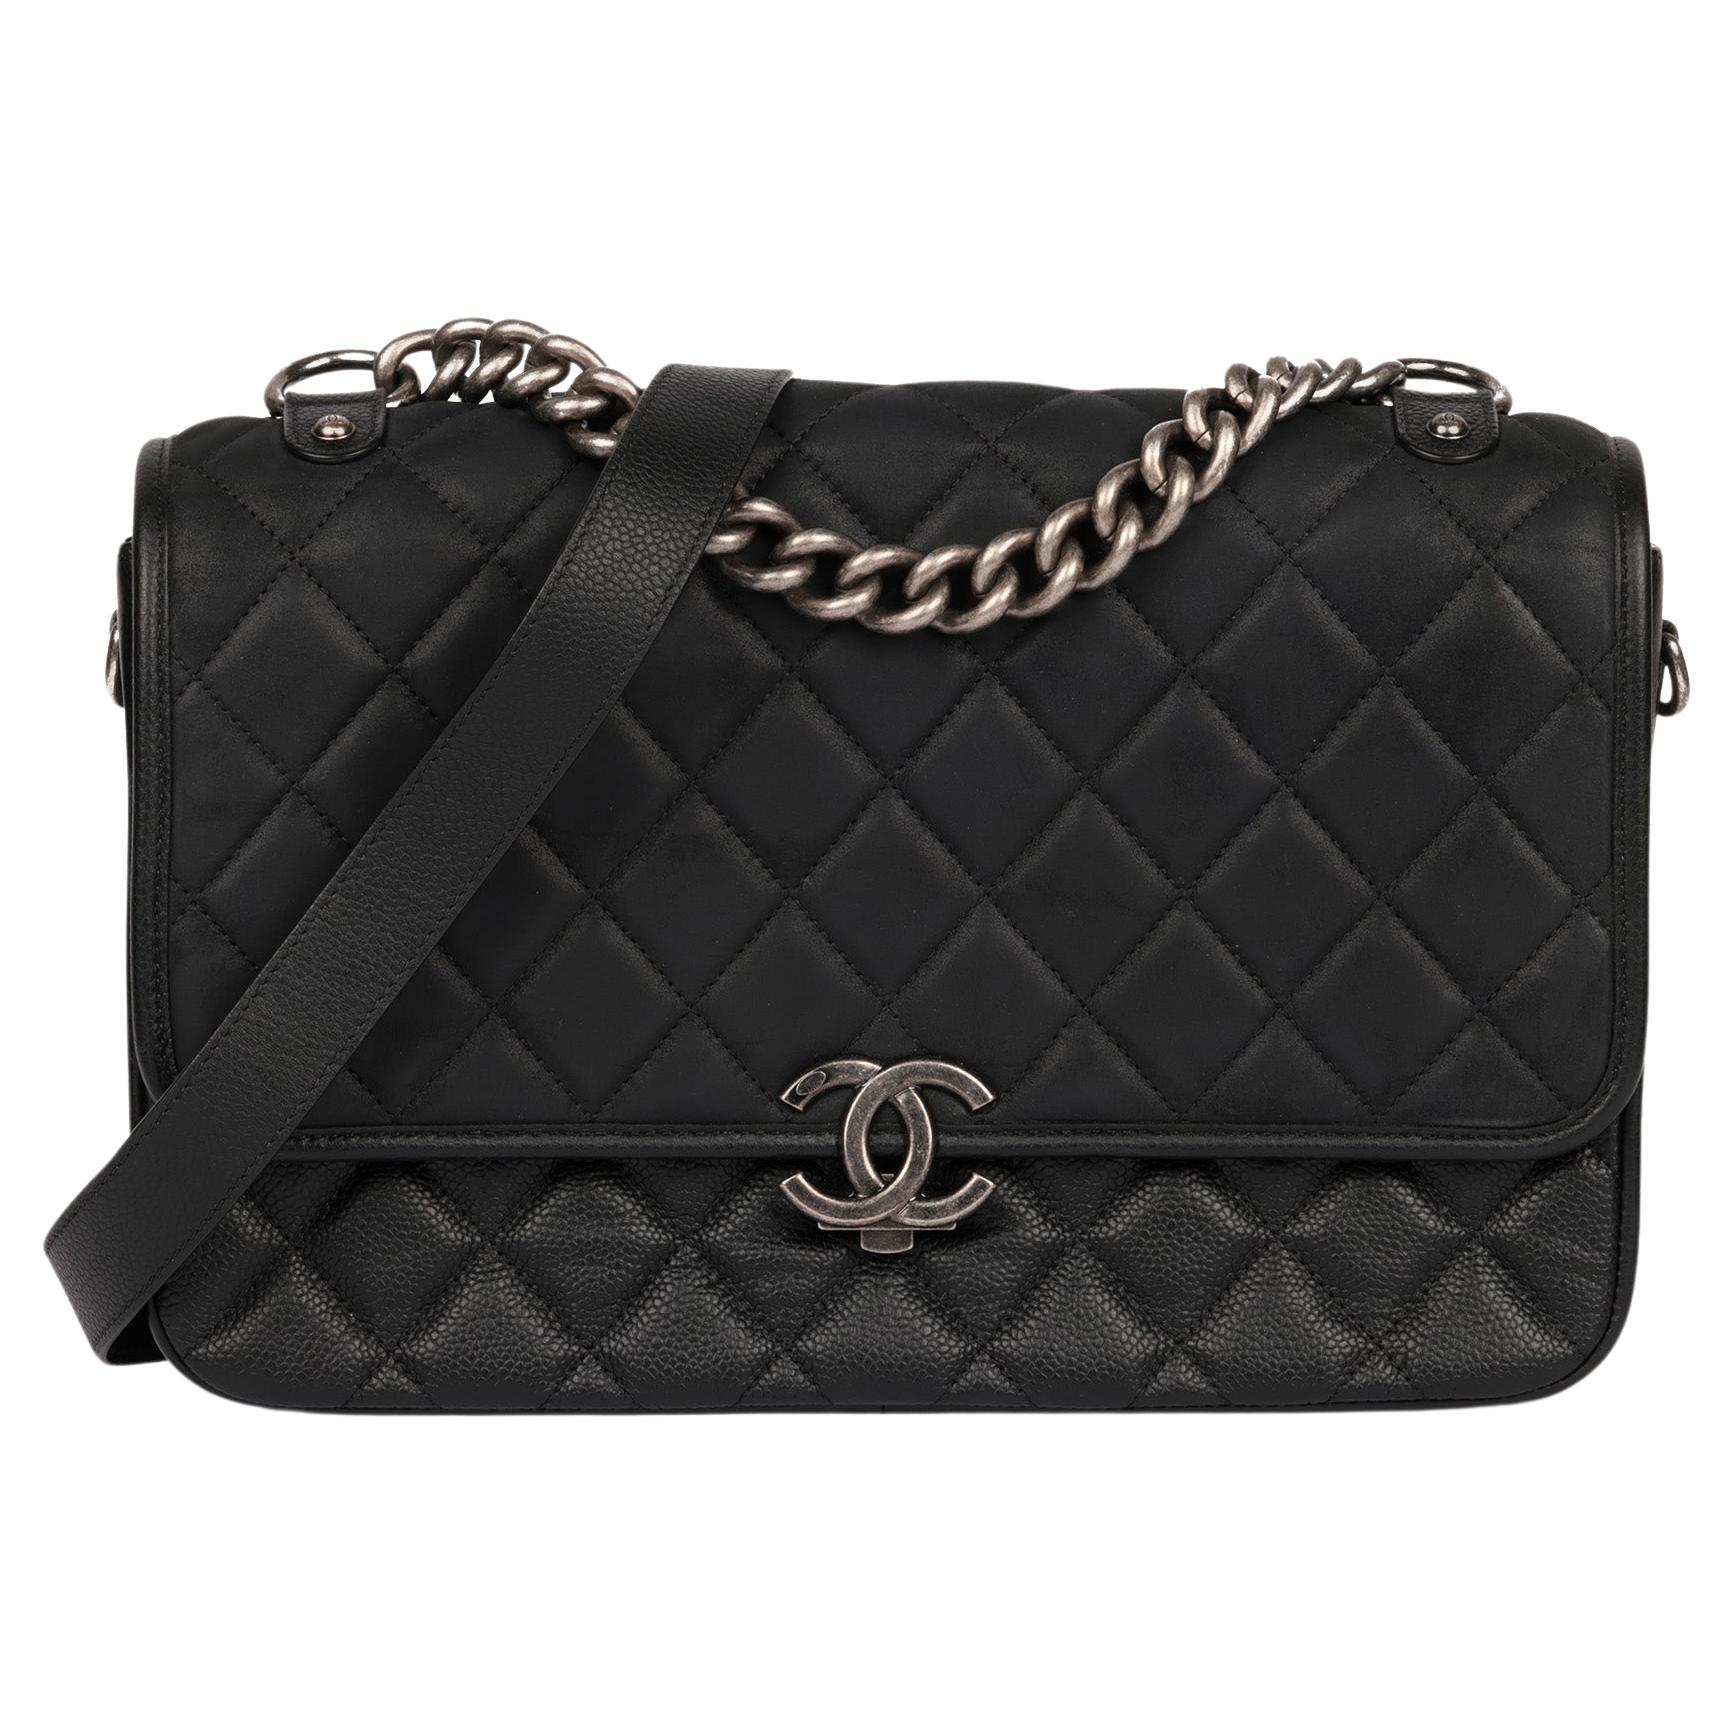 Chanel Black Quilted Caviar Leather & Iridescent Calfskin Daily Carry Messenger For Sale